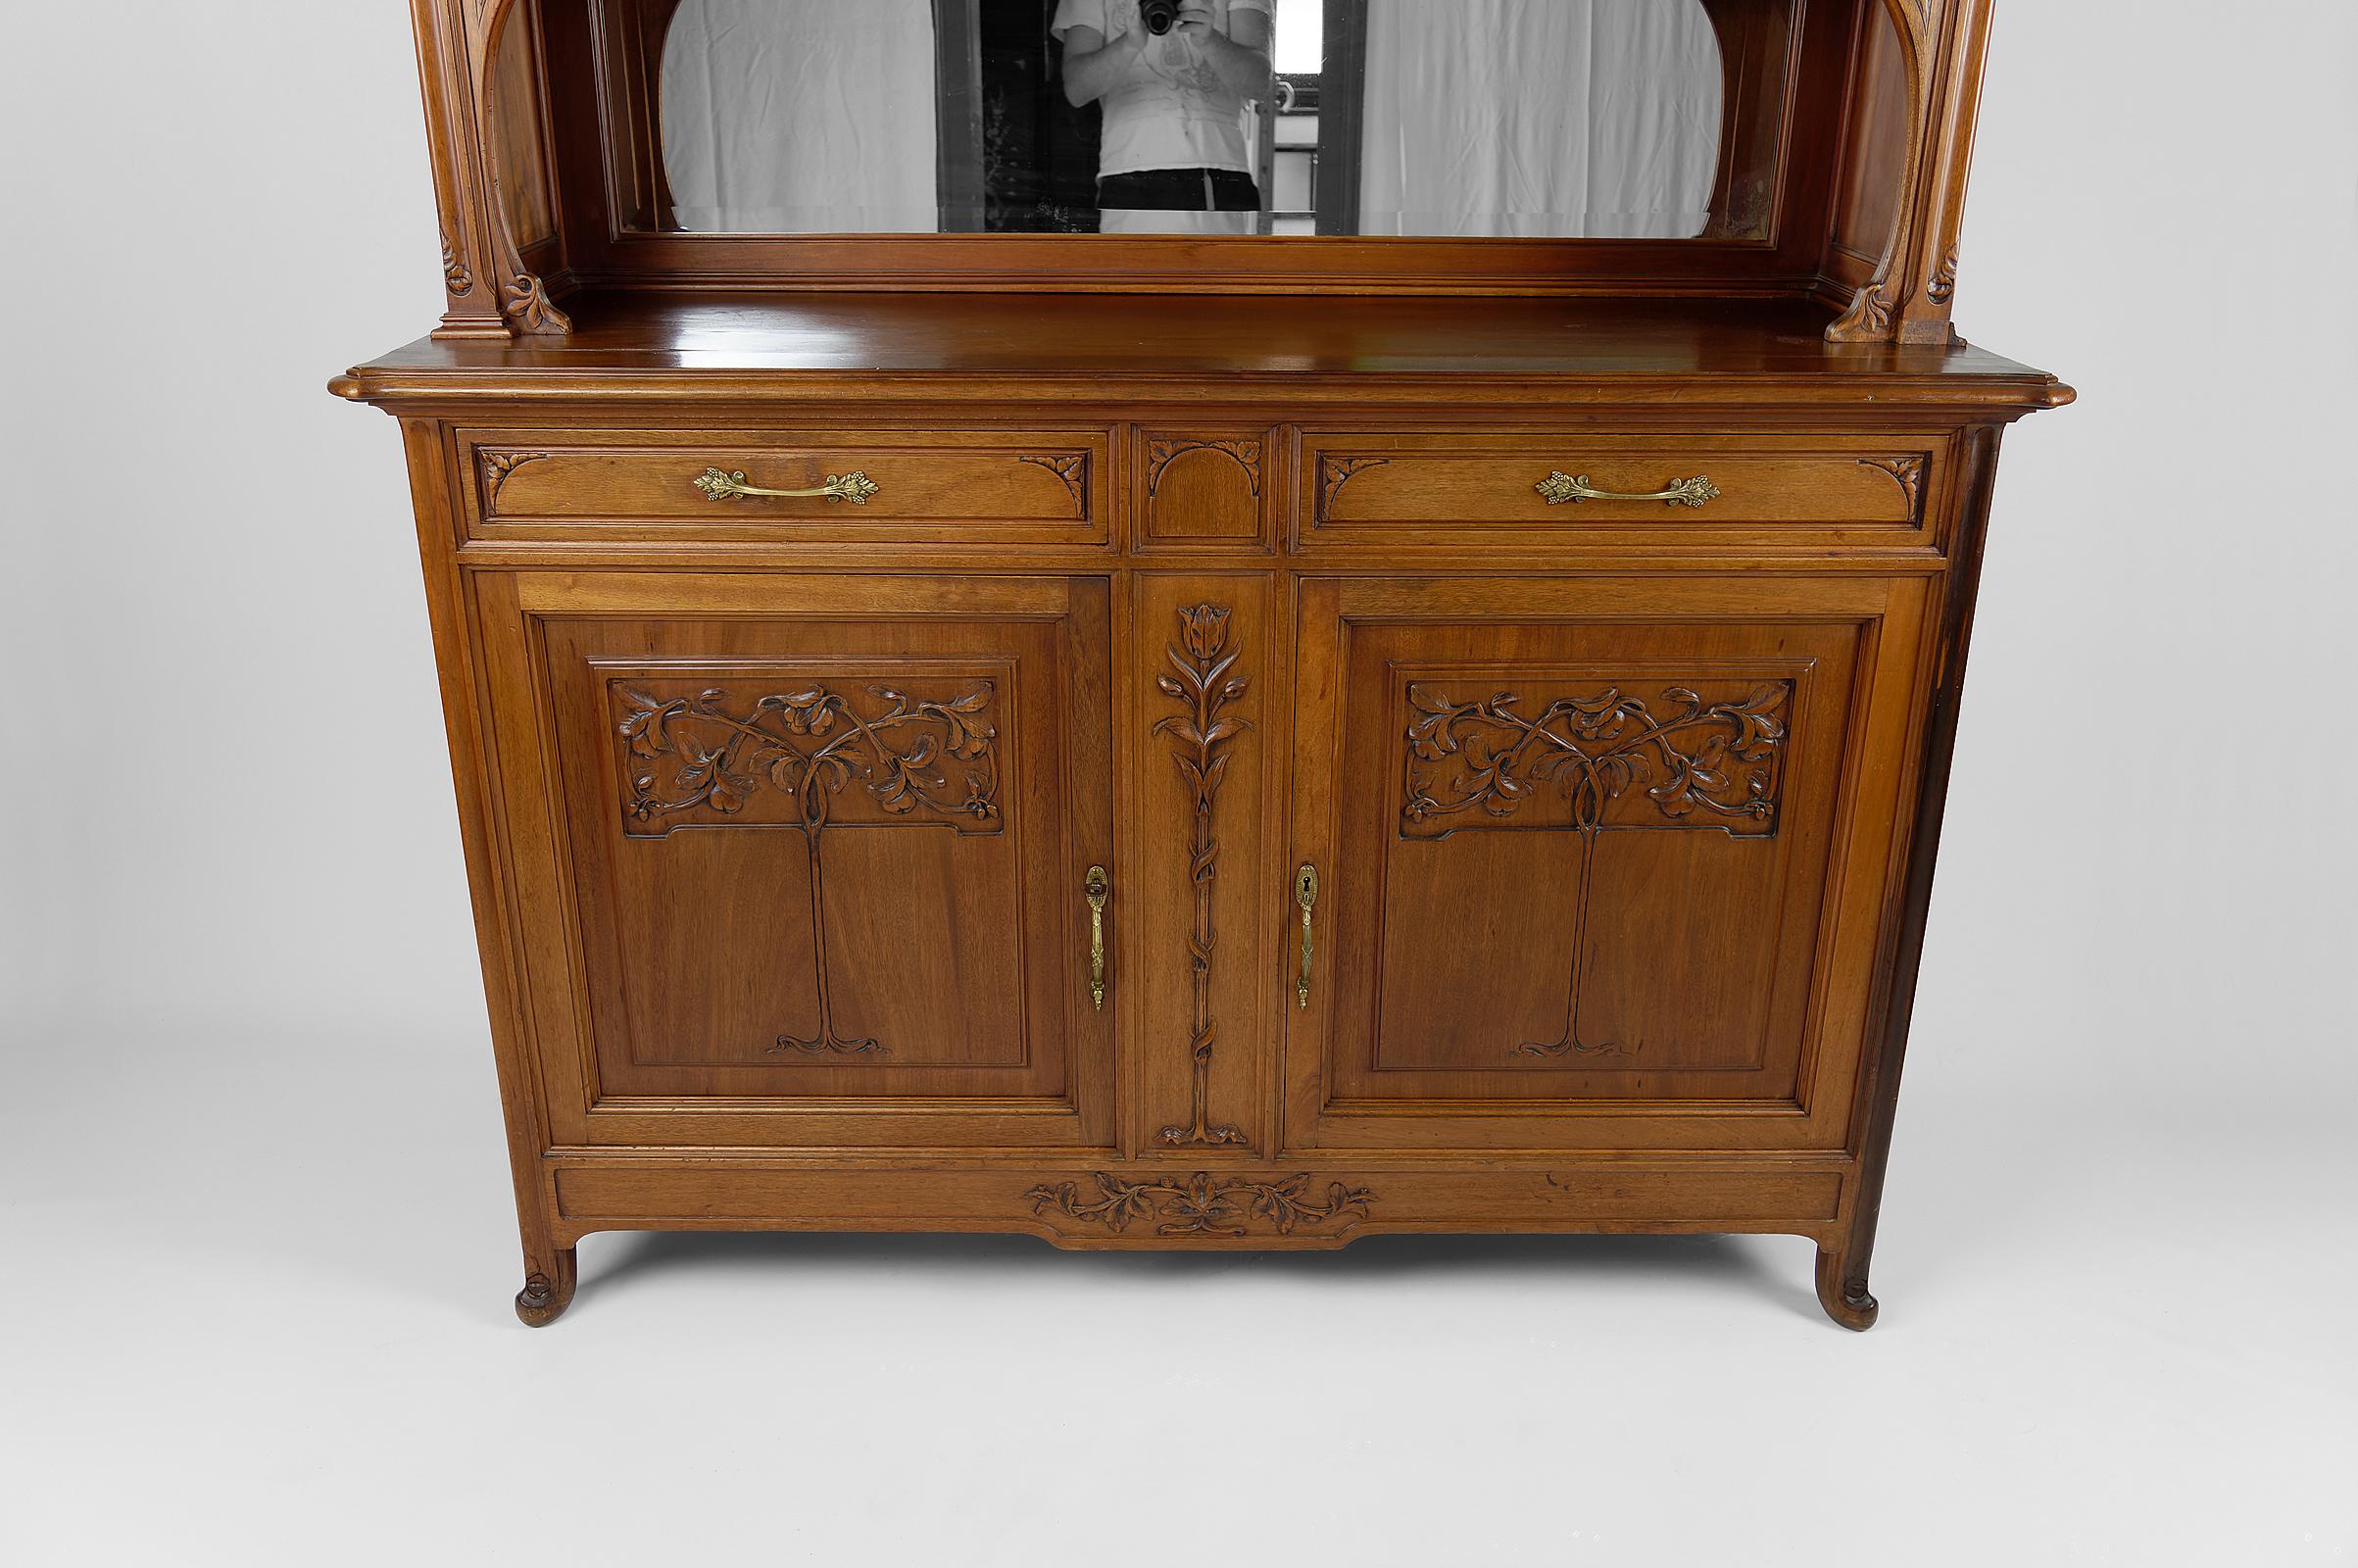 French Art Nouveau Sideboard in Carved Walnut with Stained Glass, circa 1910 For Sale 3